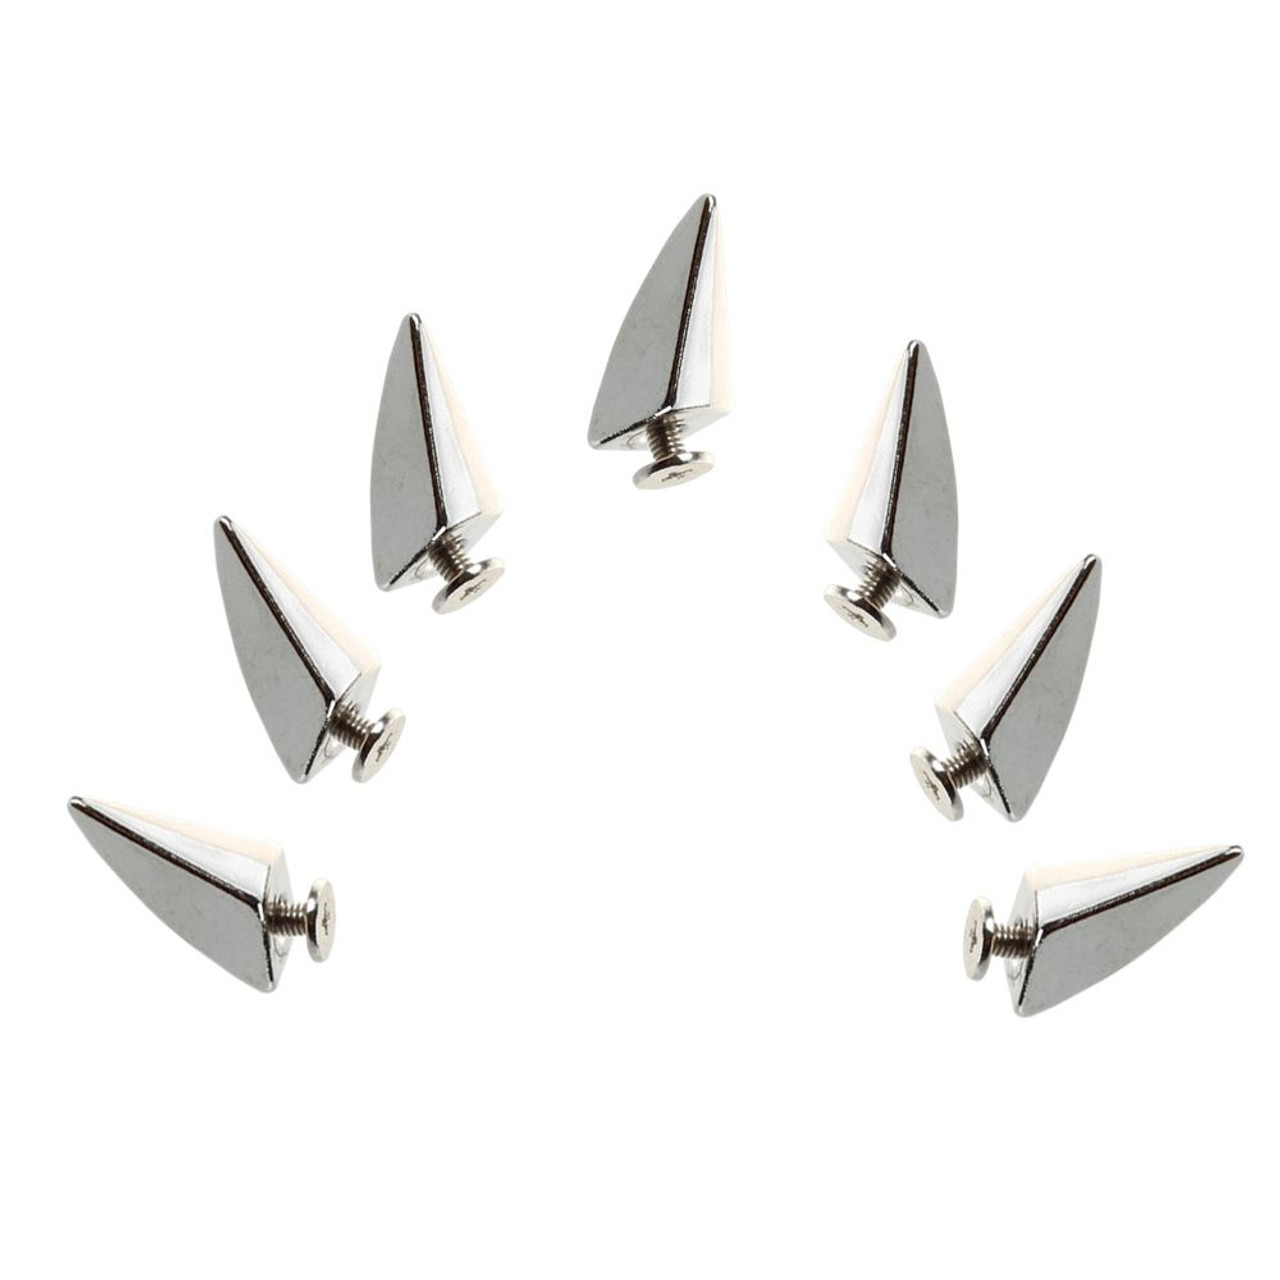 Metal Dragon Claw Cone Spike Studs with Back Screws - Silver - (Pack of 10)